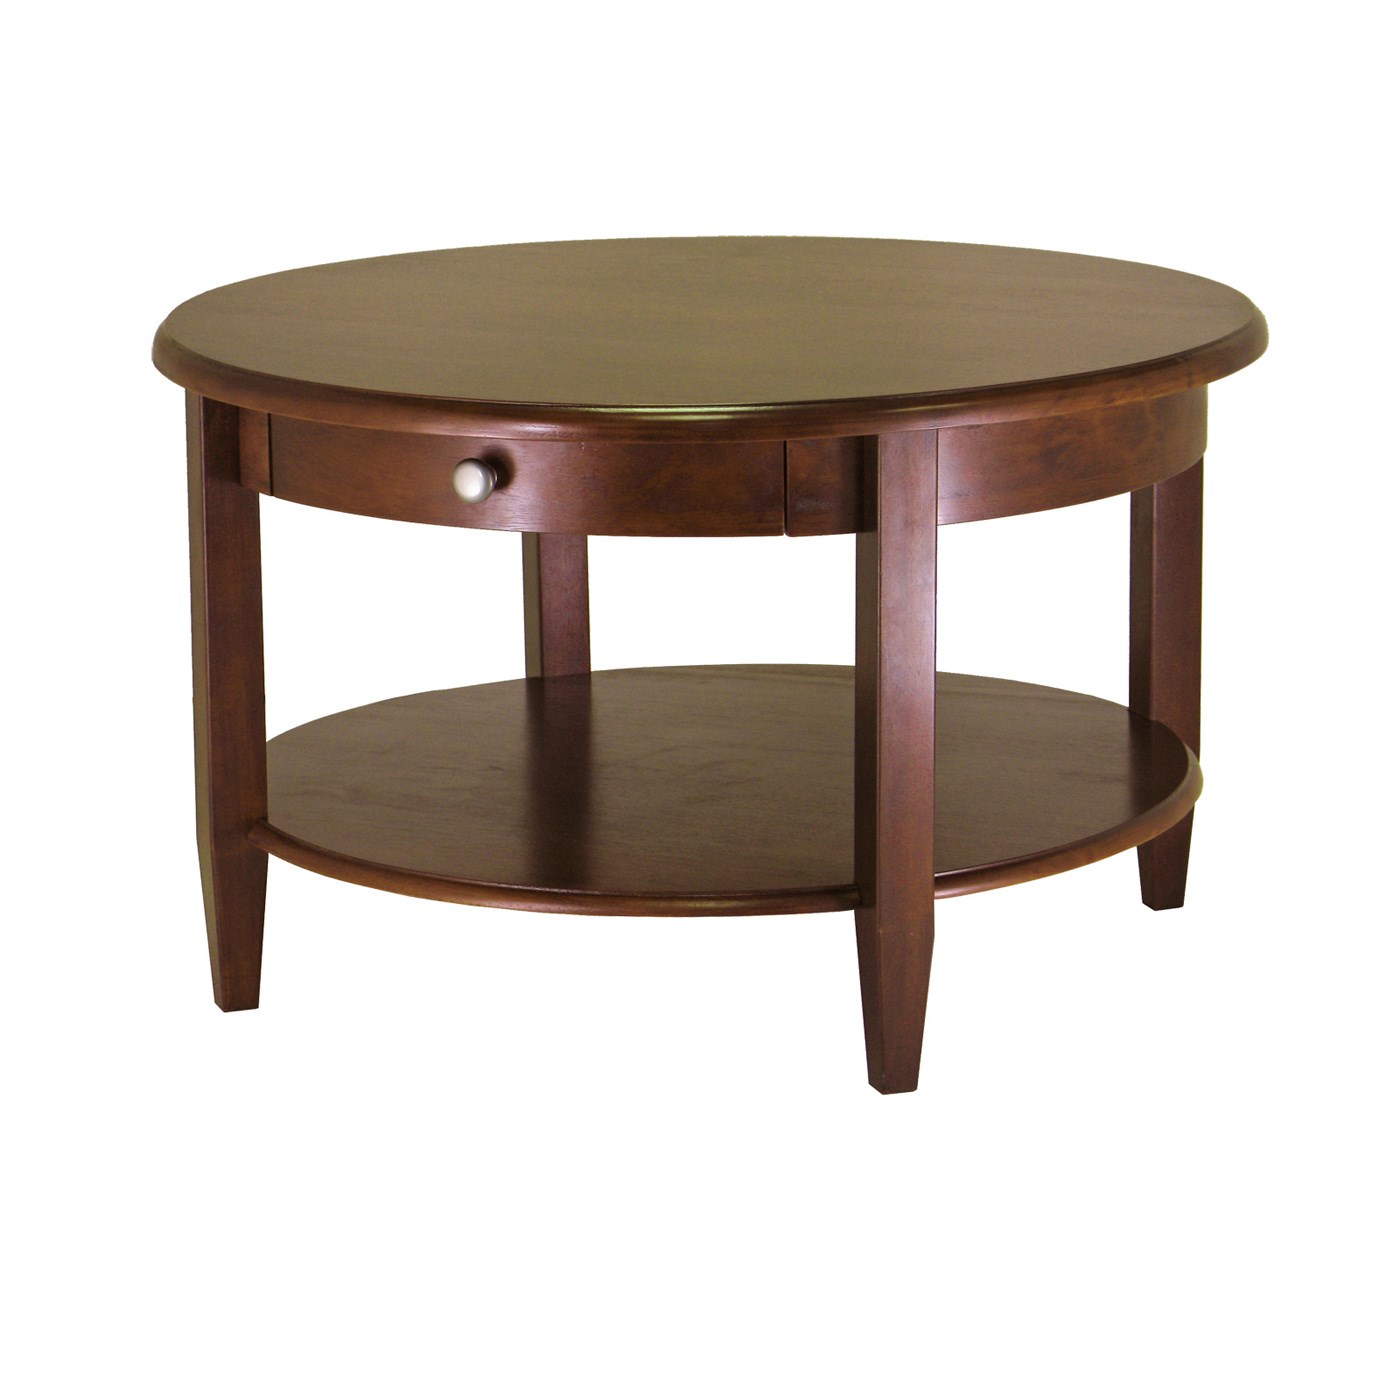 Concord Round Coffee Table w/ Drawer & Shelf - Winsome Wood 94231